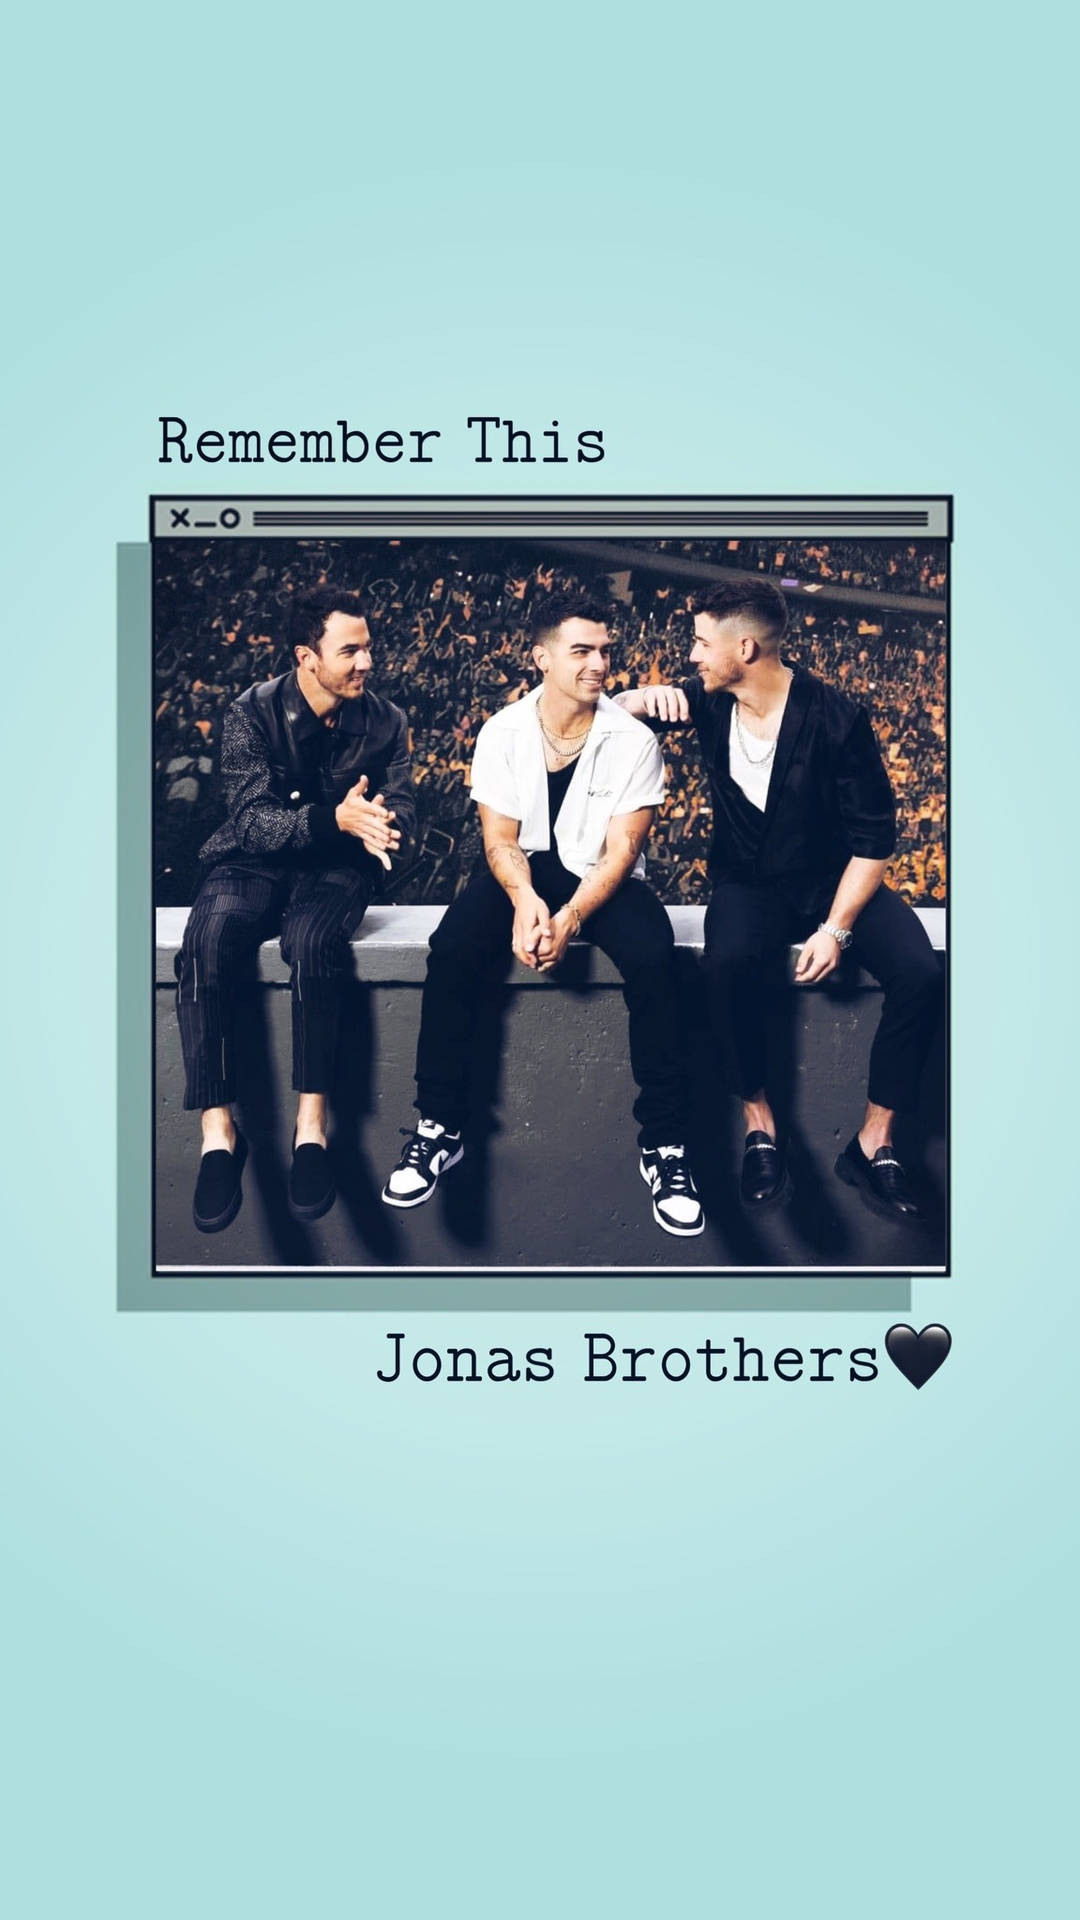 Jonas Brothers Remember This Tour Poster Background